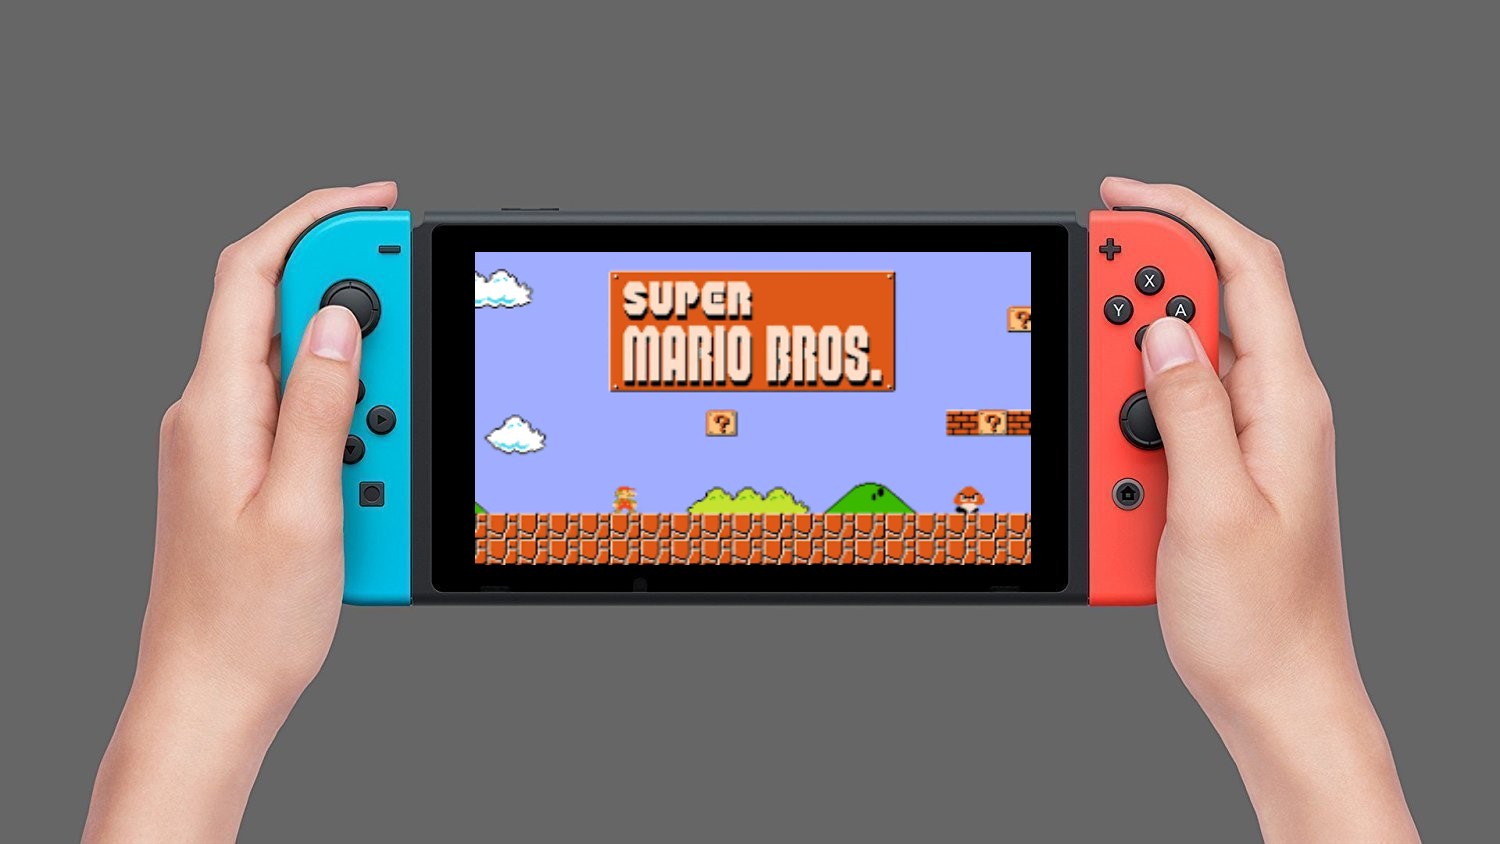 virtual console games switch